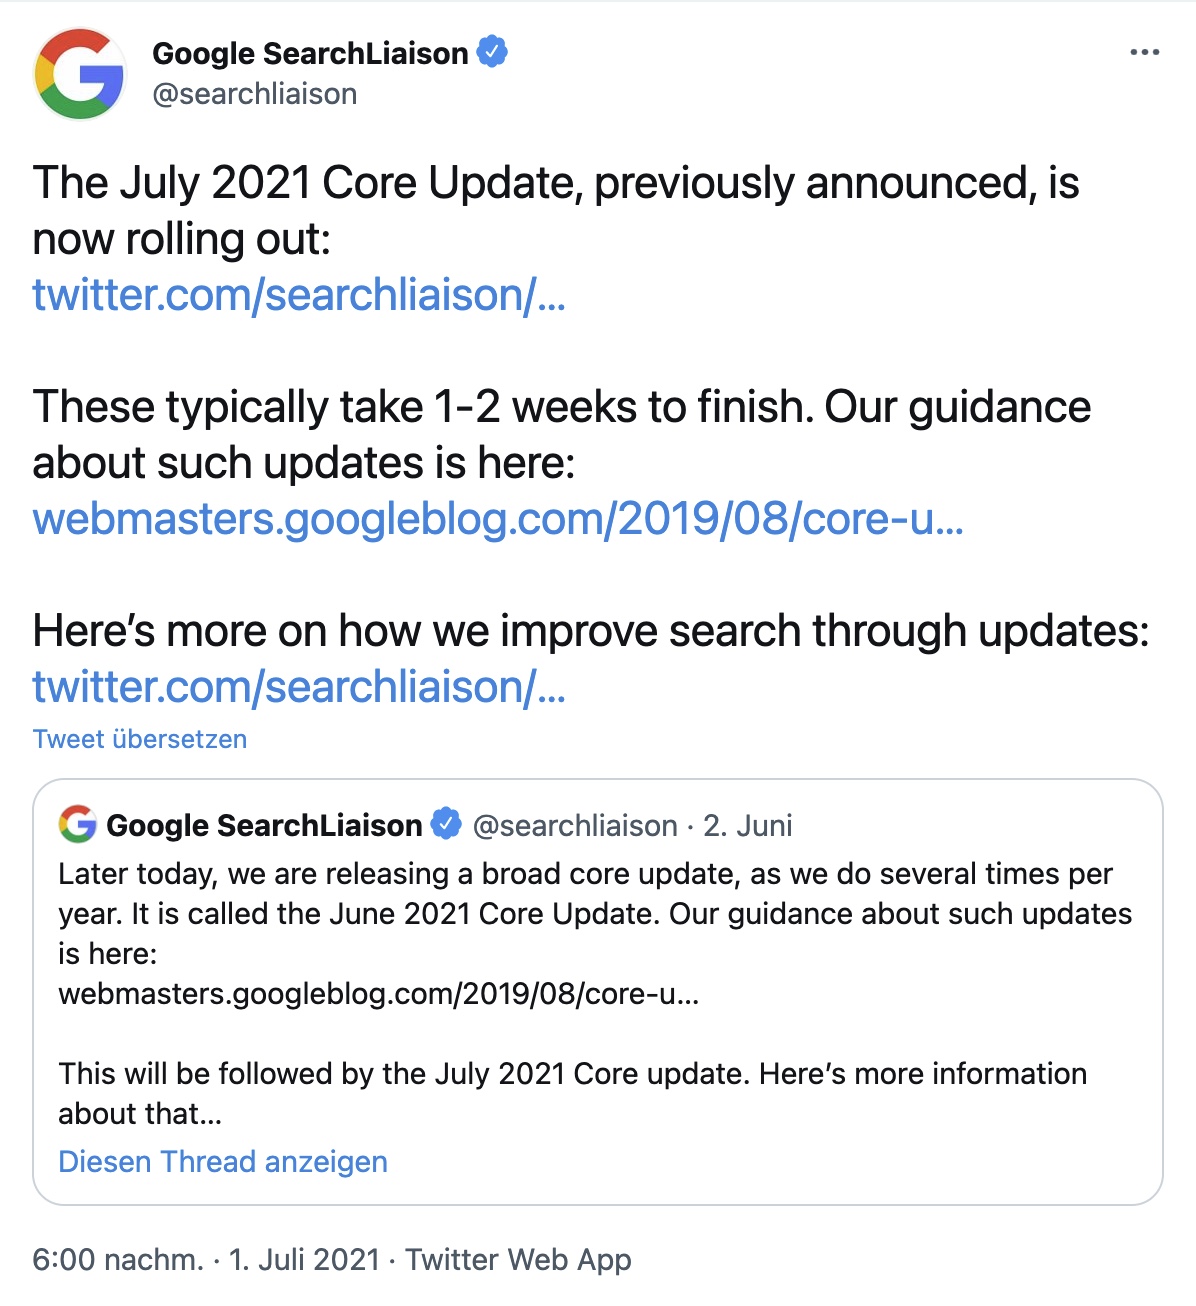 The July 2021 Core Update, previously announced, is now rolling out. 
These typically take 1-2 weeks to finish. Our guidance about such updates is here
Here’s more on how we improve search through updates